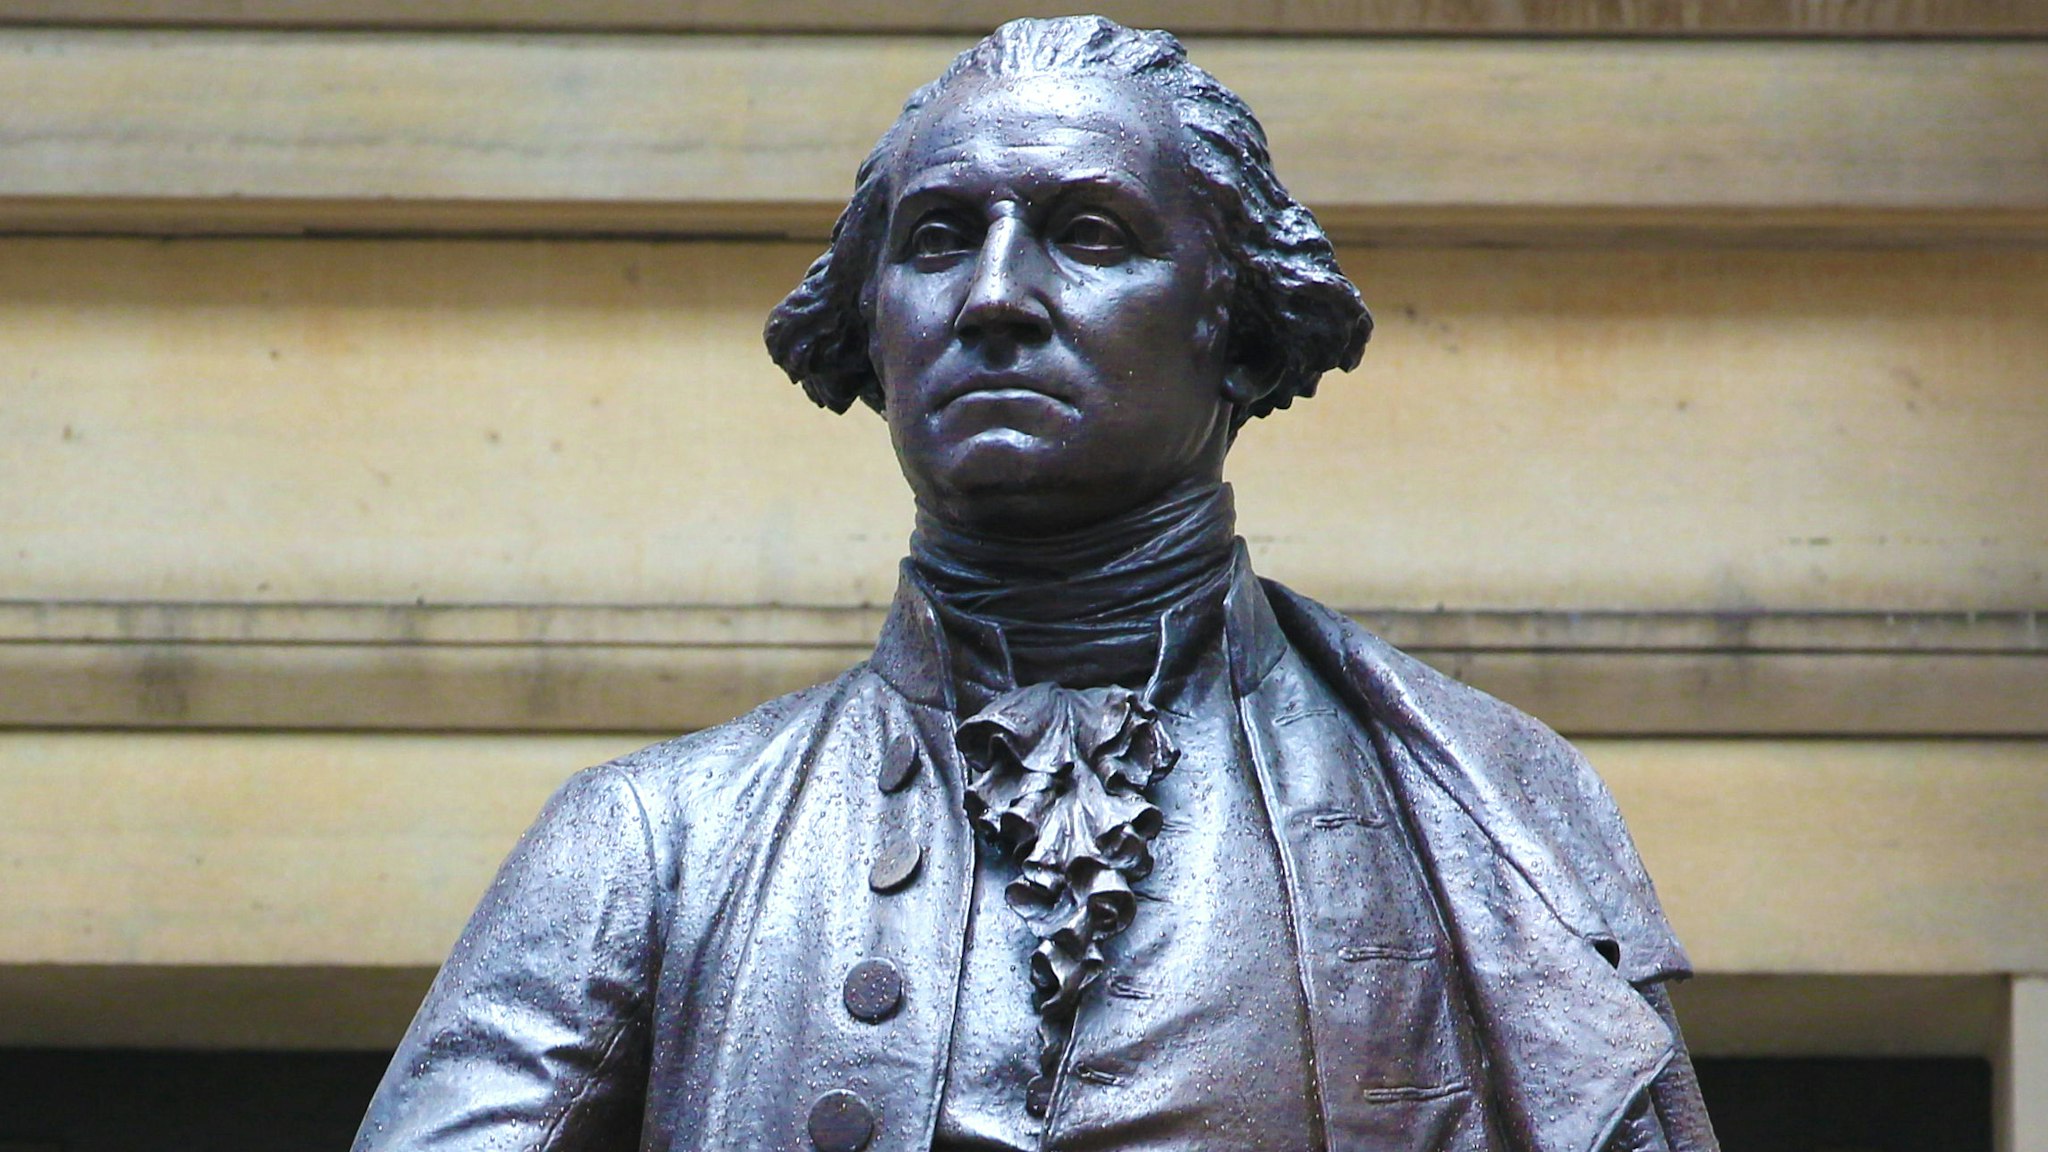 The Bronze statue of George Washington on the front steps of Federal Hall in Wall Street, Manhattan, New York City. John Quincy Adams Ward's 1882 bronze statue of George Washington sits at the approximate site where he was inaugurated as President and where he took the oath of office as the first President of the United States. New York City, USA. 16th September 2014.